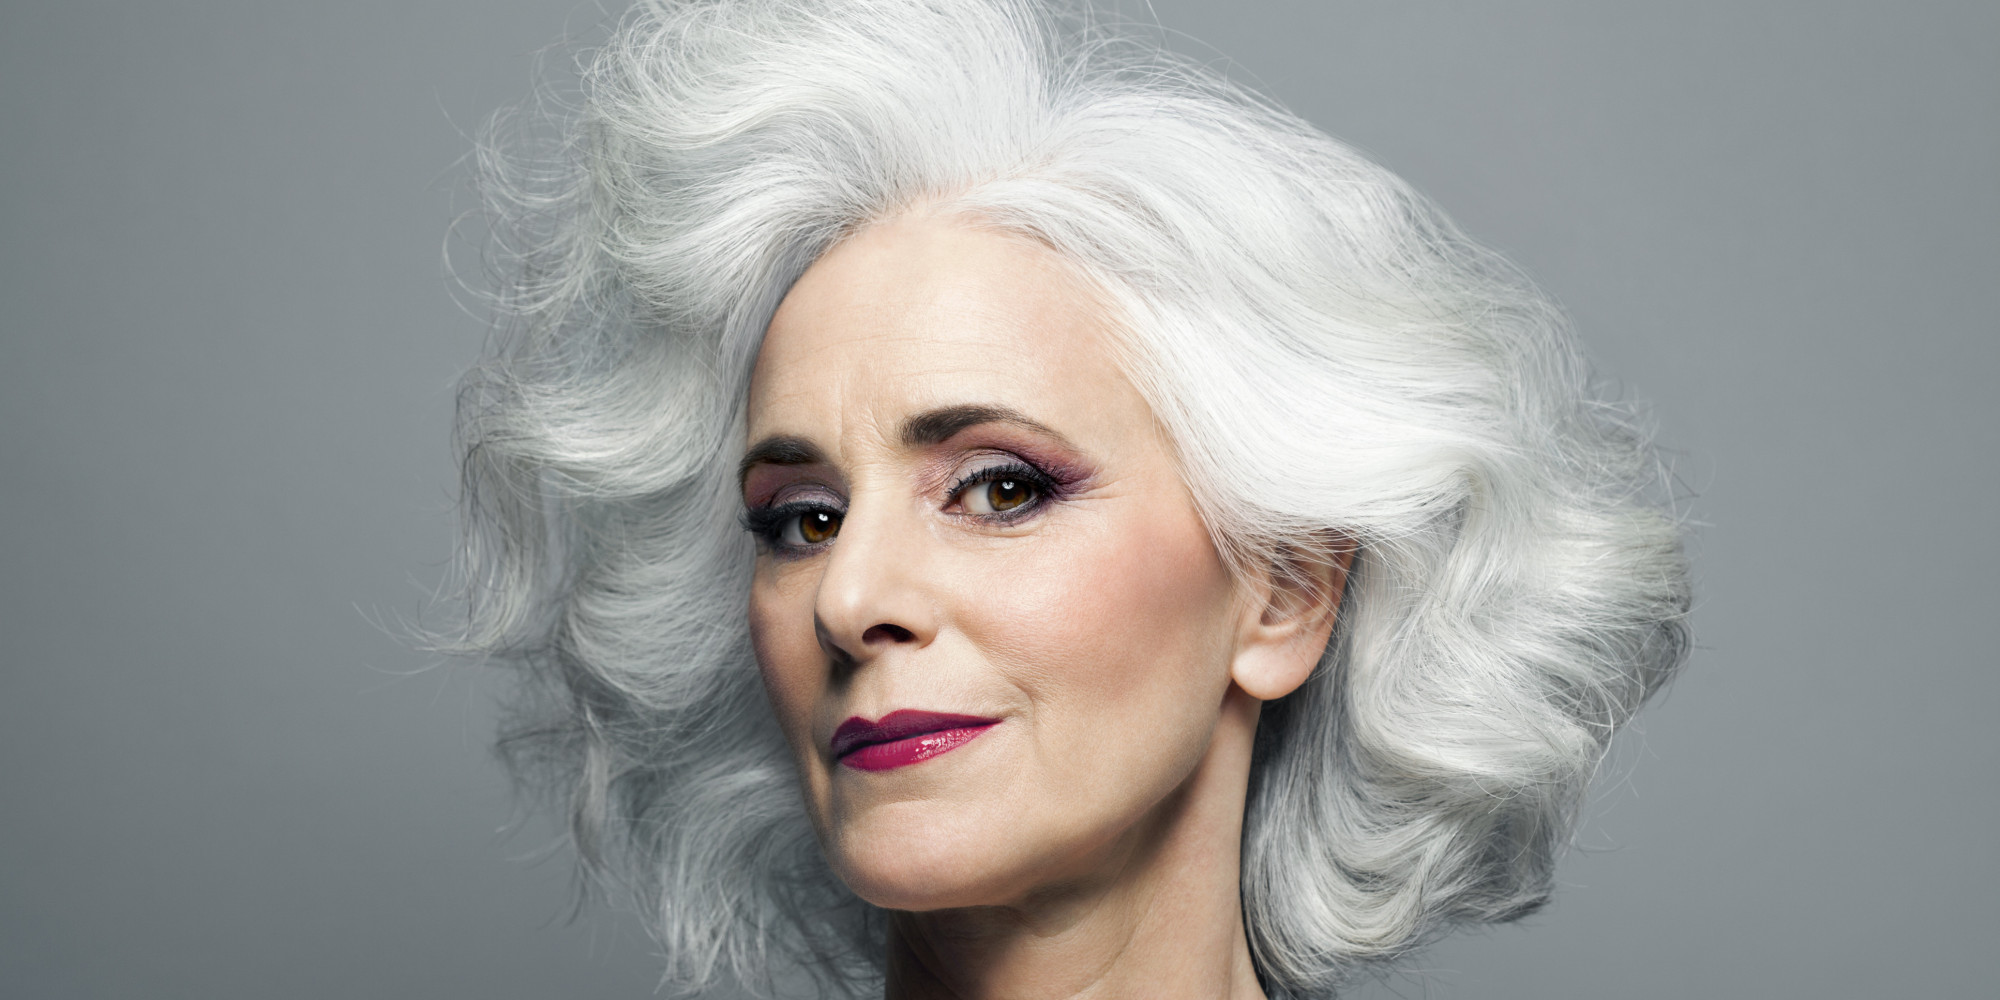 Makeup tips for older women and girls